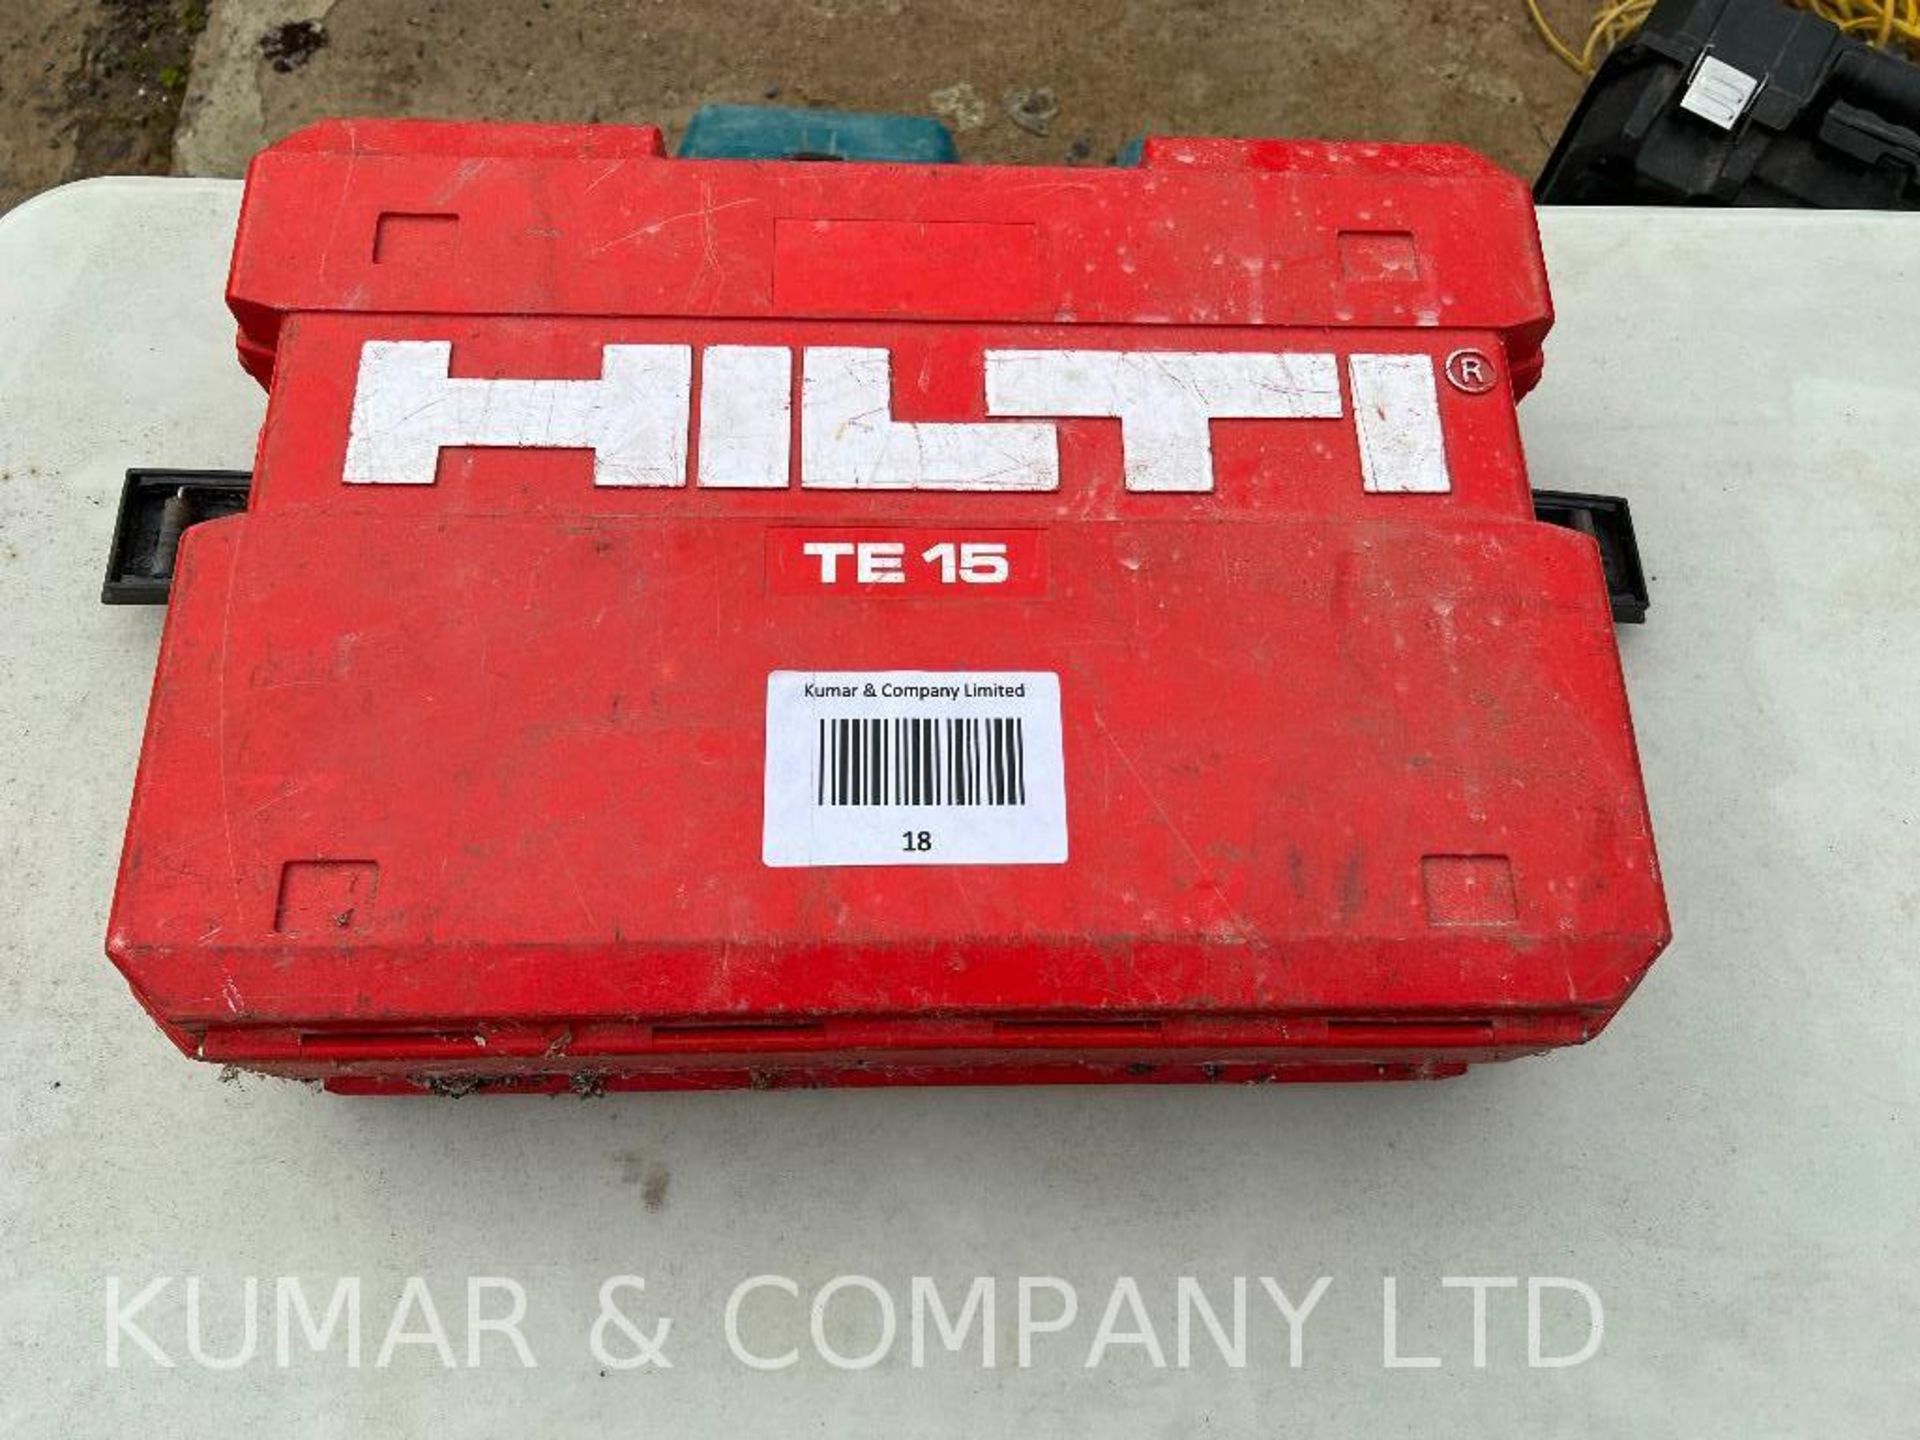 Hilti TE15 Rotary Hammer Drill in Case with Various Attachments as Shown. Serial No: 0021934 PLEASE